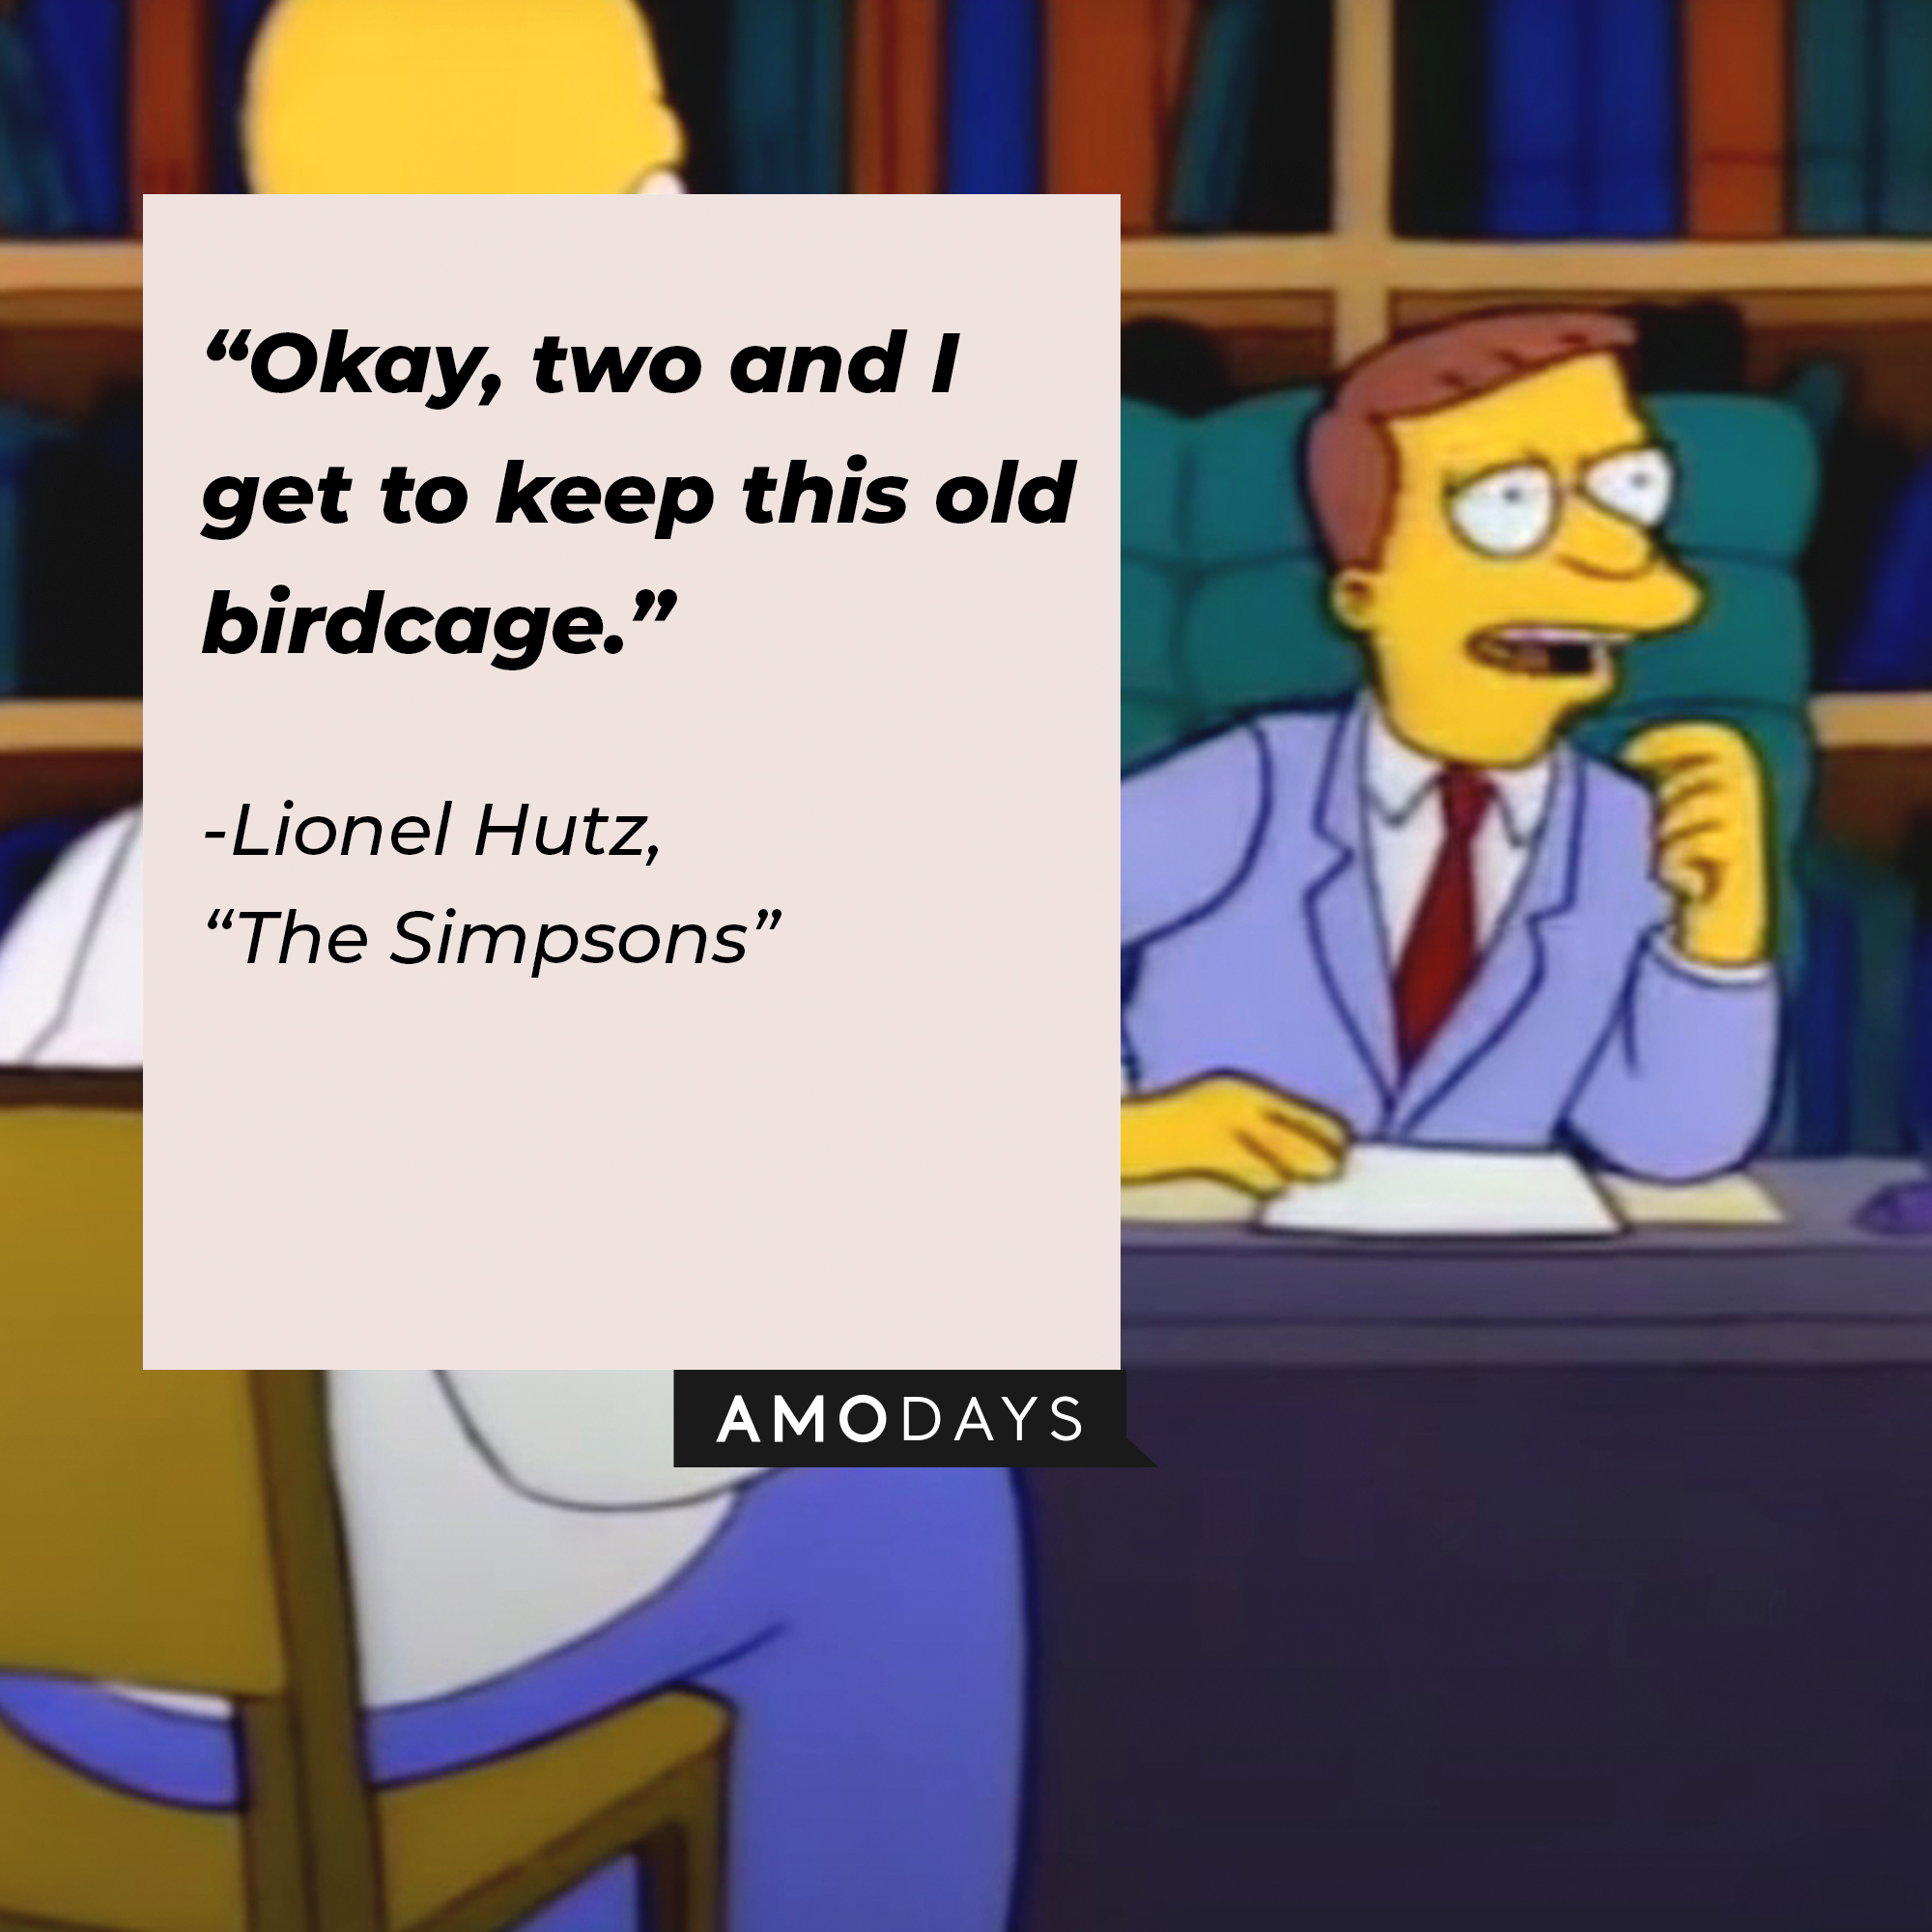 Lionel Hutz’s quote from “The Simpsons”: “Okay, two and I get to keep this old birdcage.” | Source: facebook.com/TheSimpsons